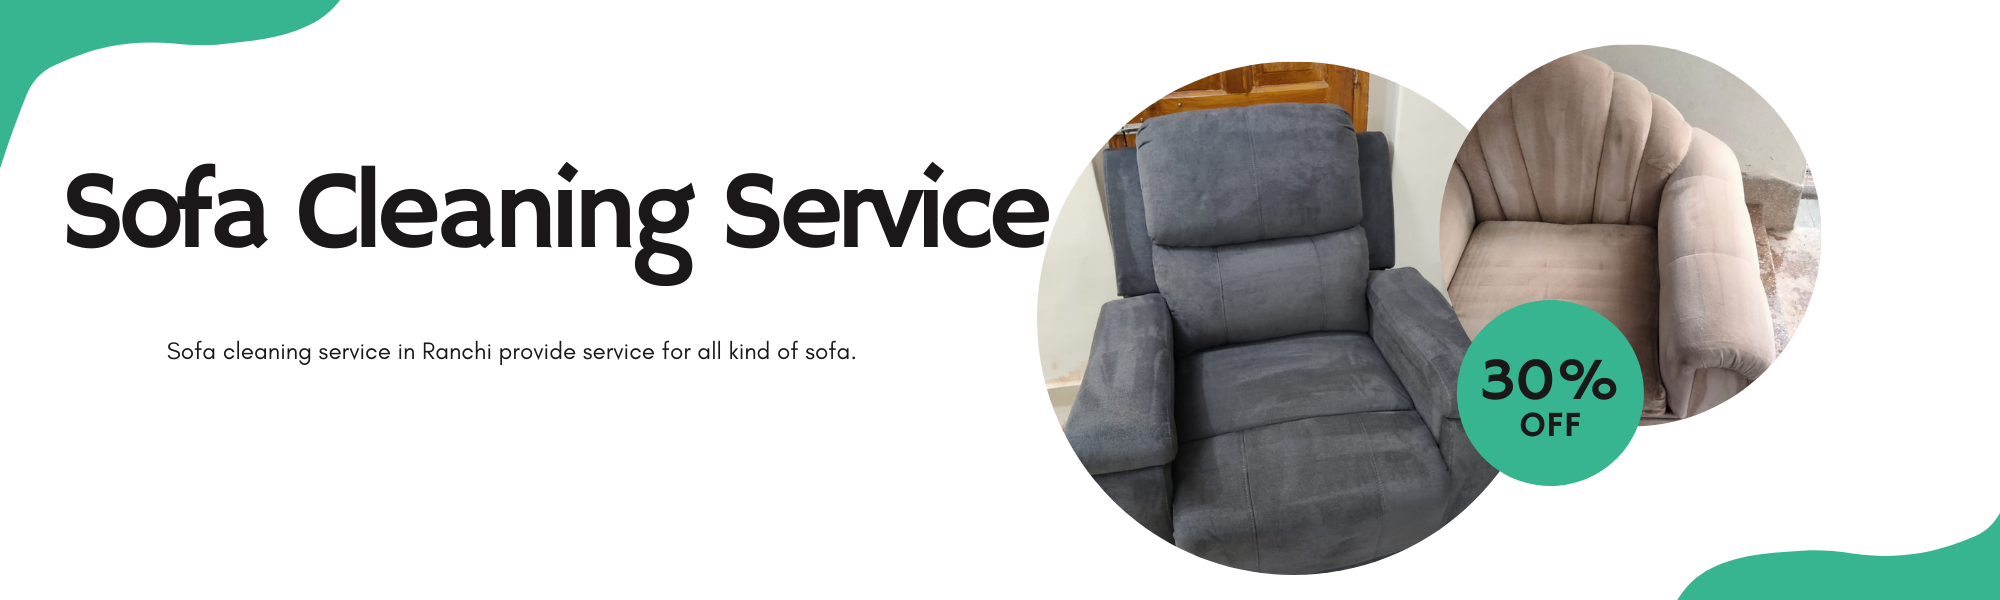 Sofa Cleaning Service in Ranchi